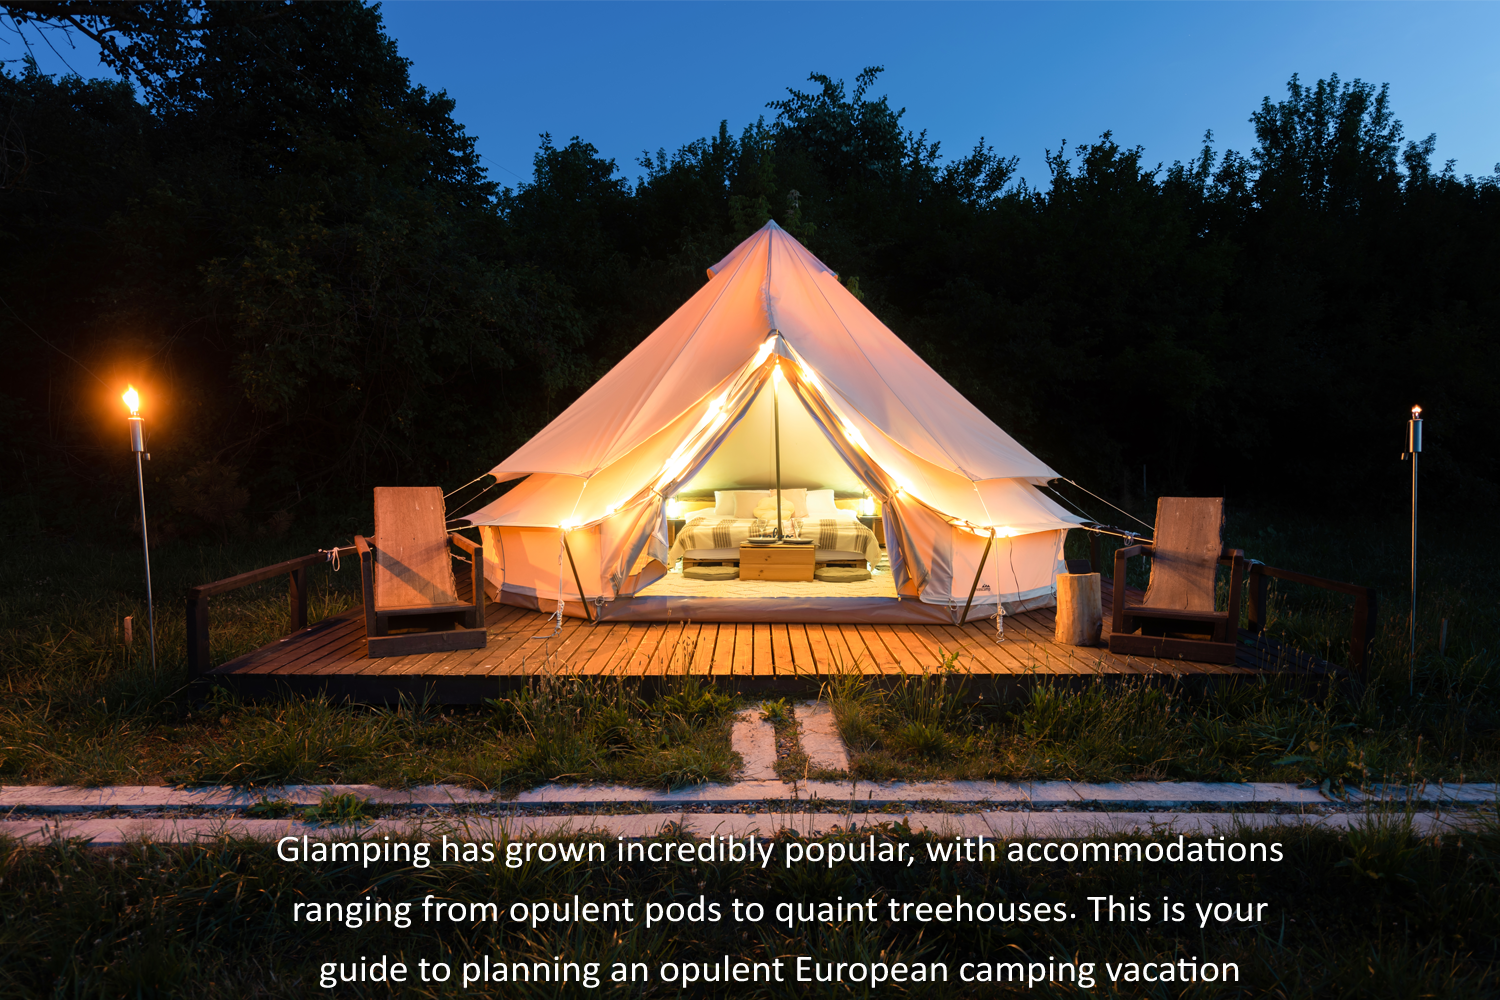 Glamping has grown incredibly popular, with accommodations ranging from opulent pods to quaint treehouses. This is your guide to planning an opulent European camping vacation